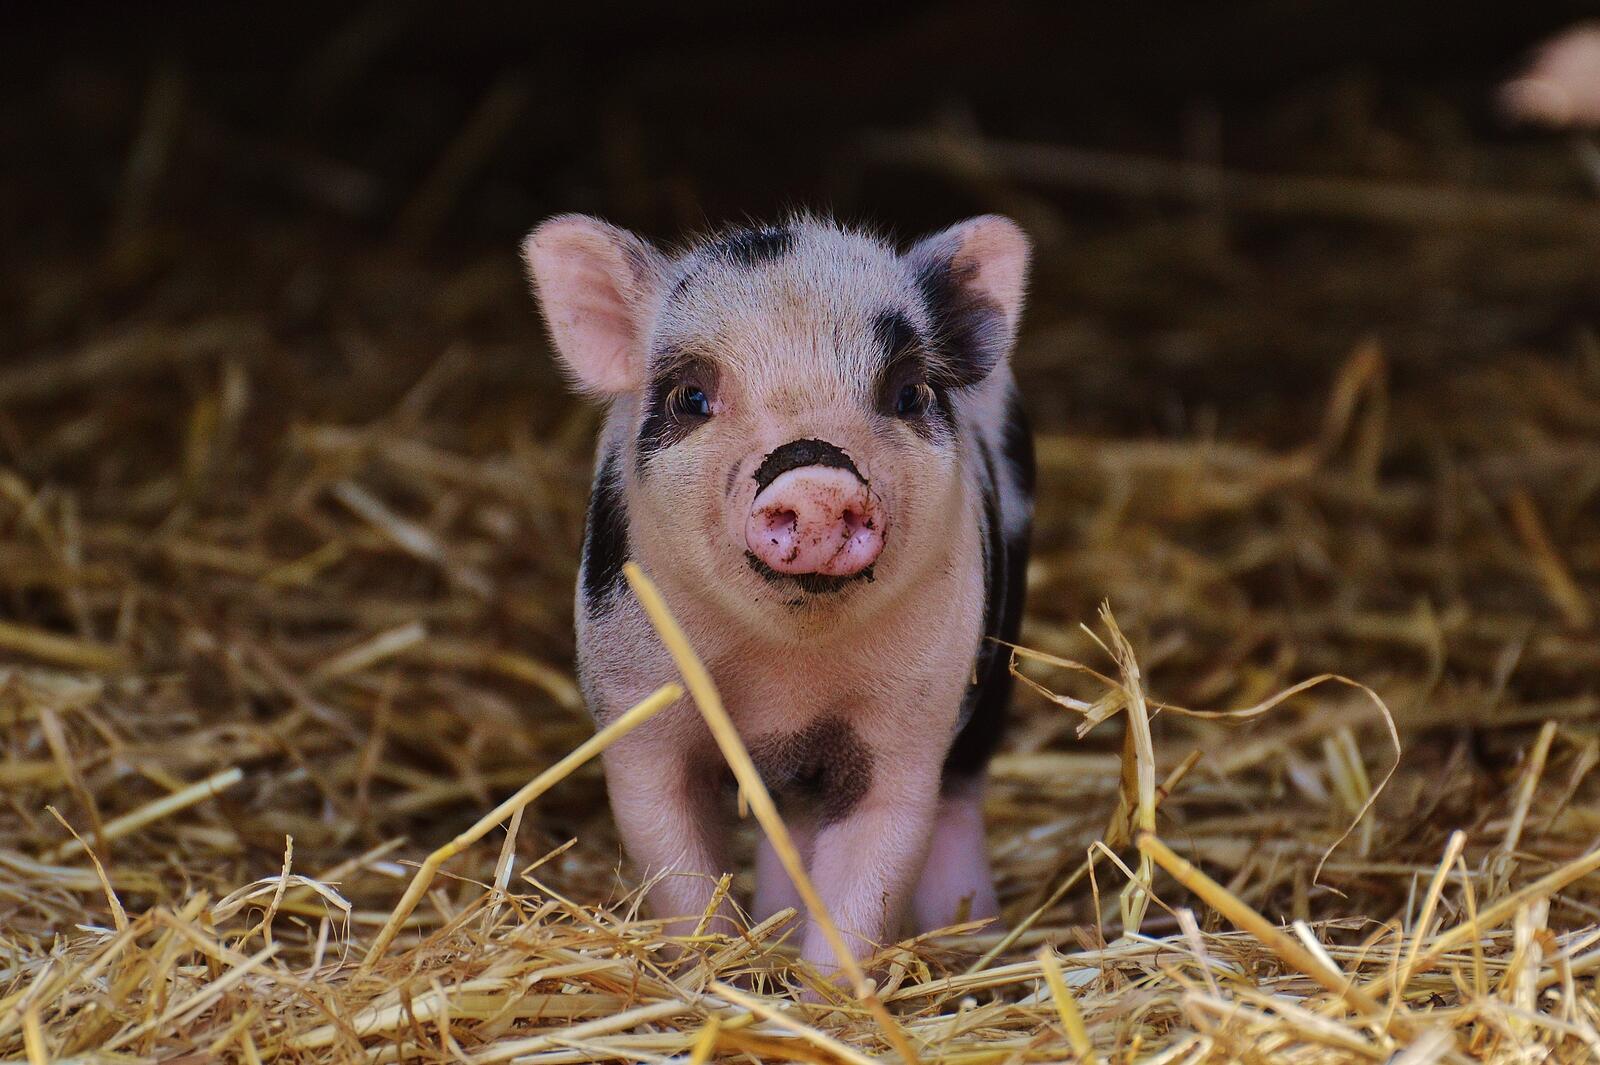 Free photo A cute little piglet on straw